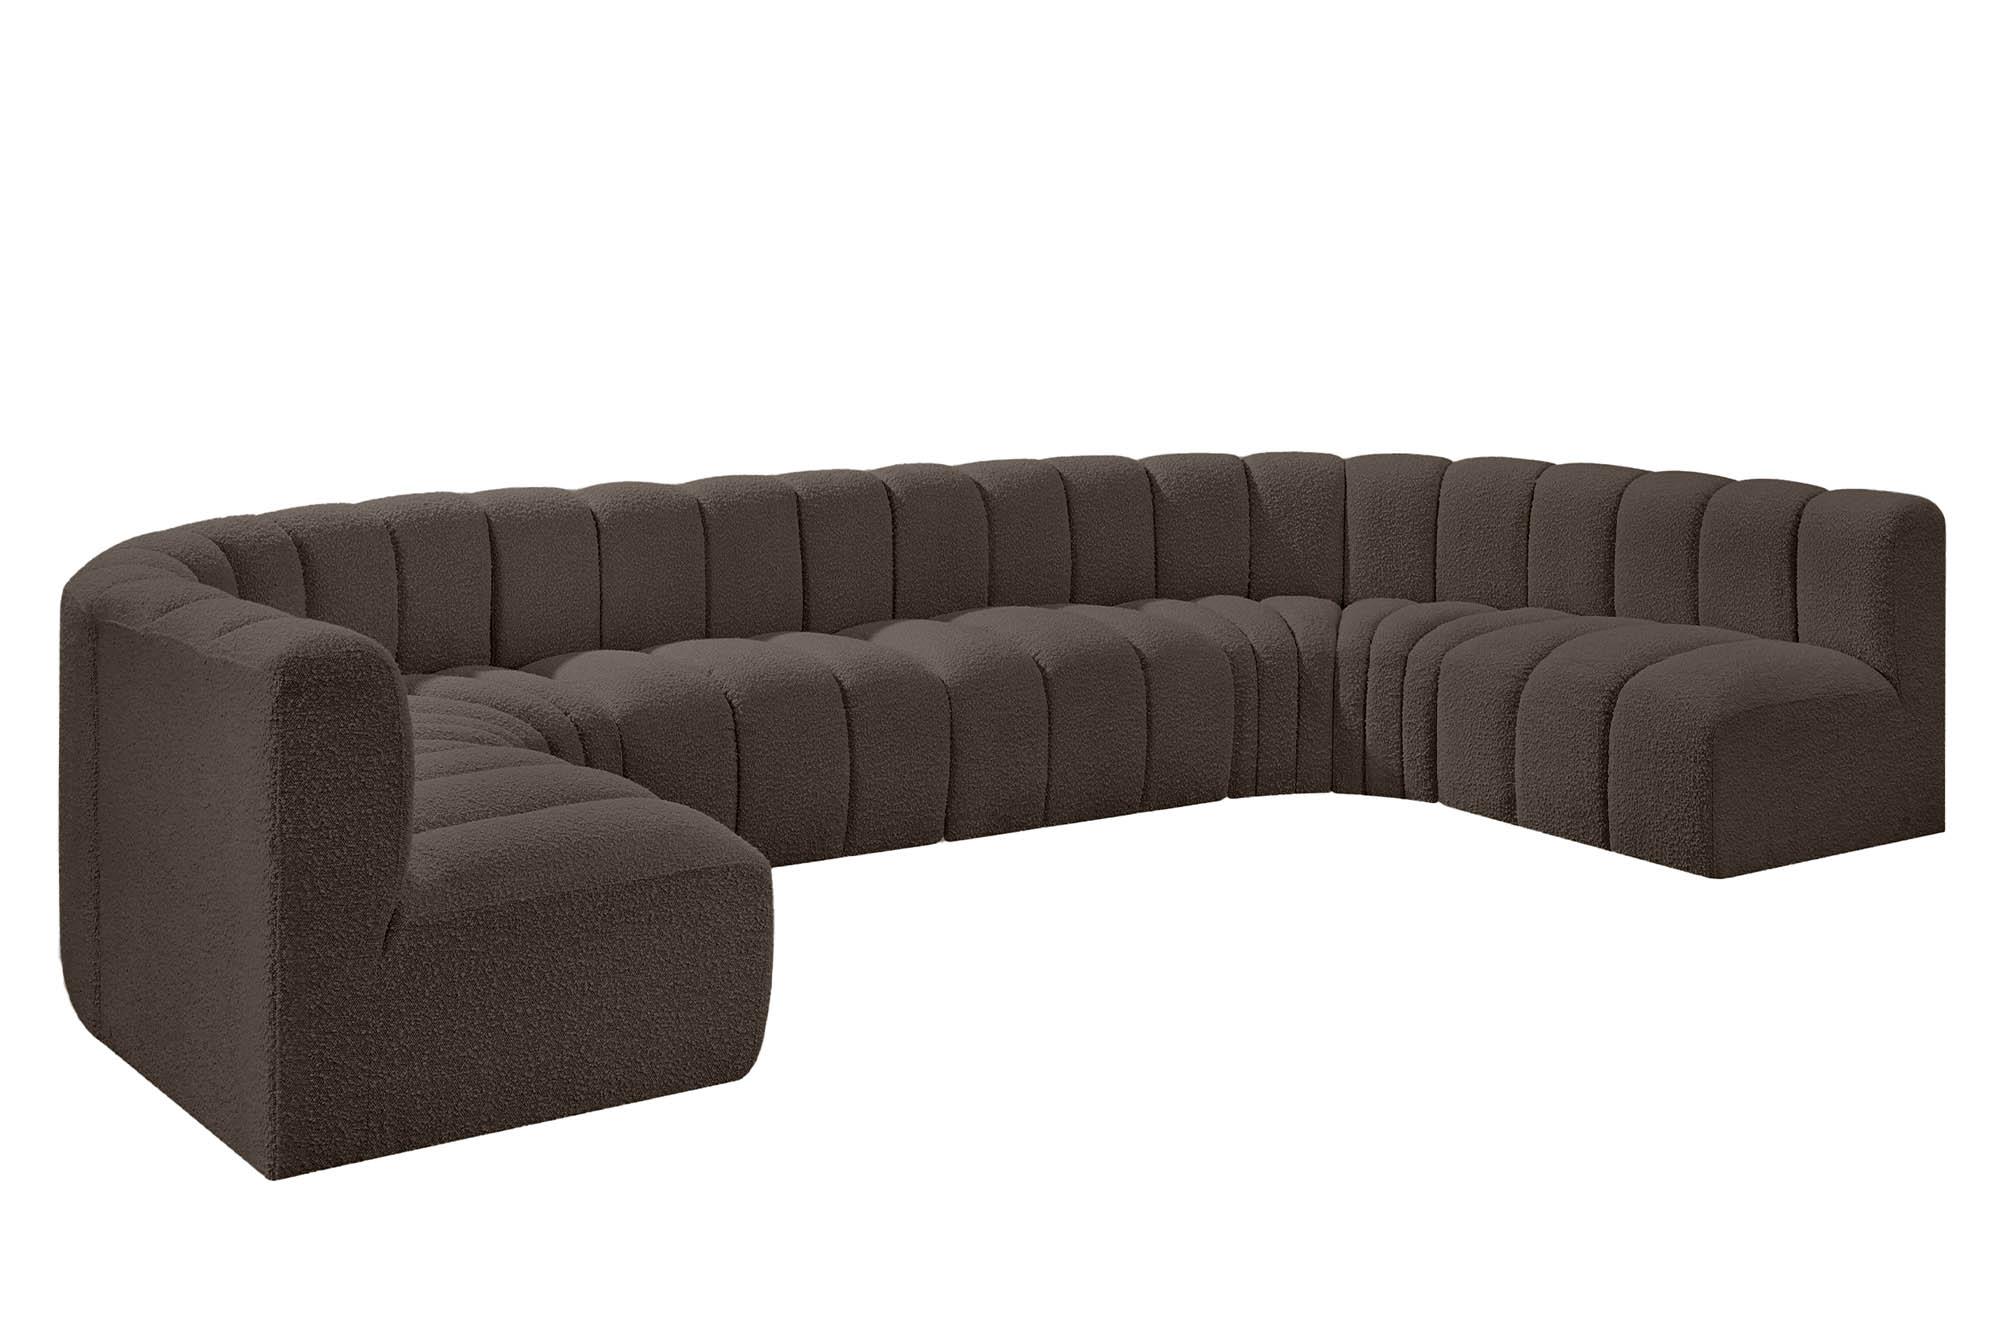 Contemporary, Modern Modular Sectional Sofa ARC 102Brown-S8A 102Brown-S8A in Brown 